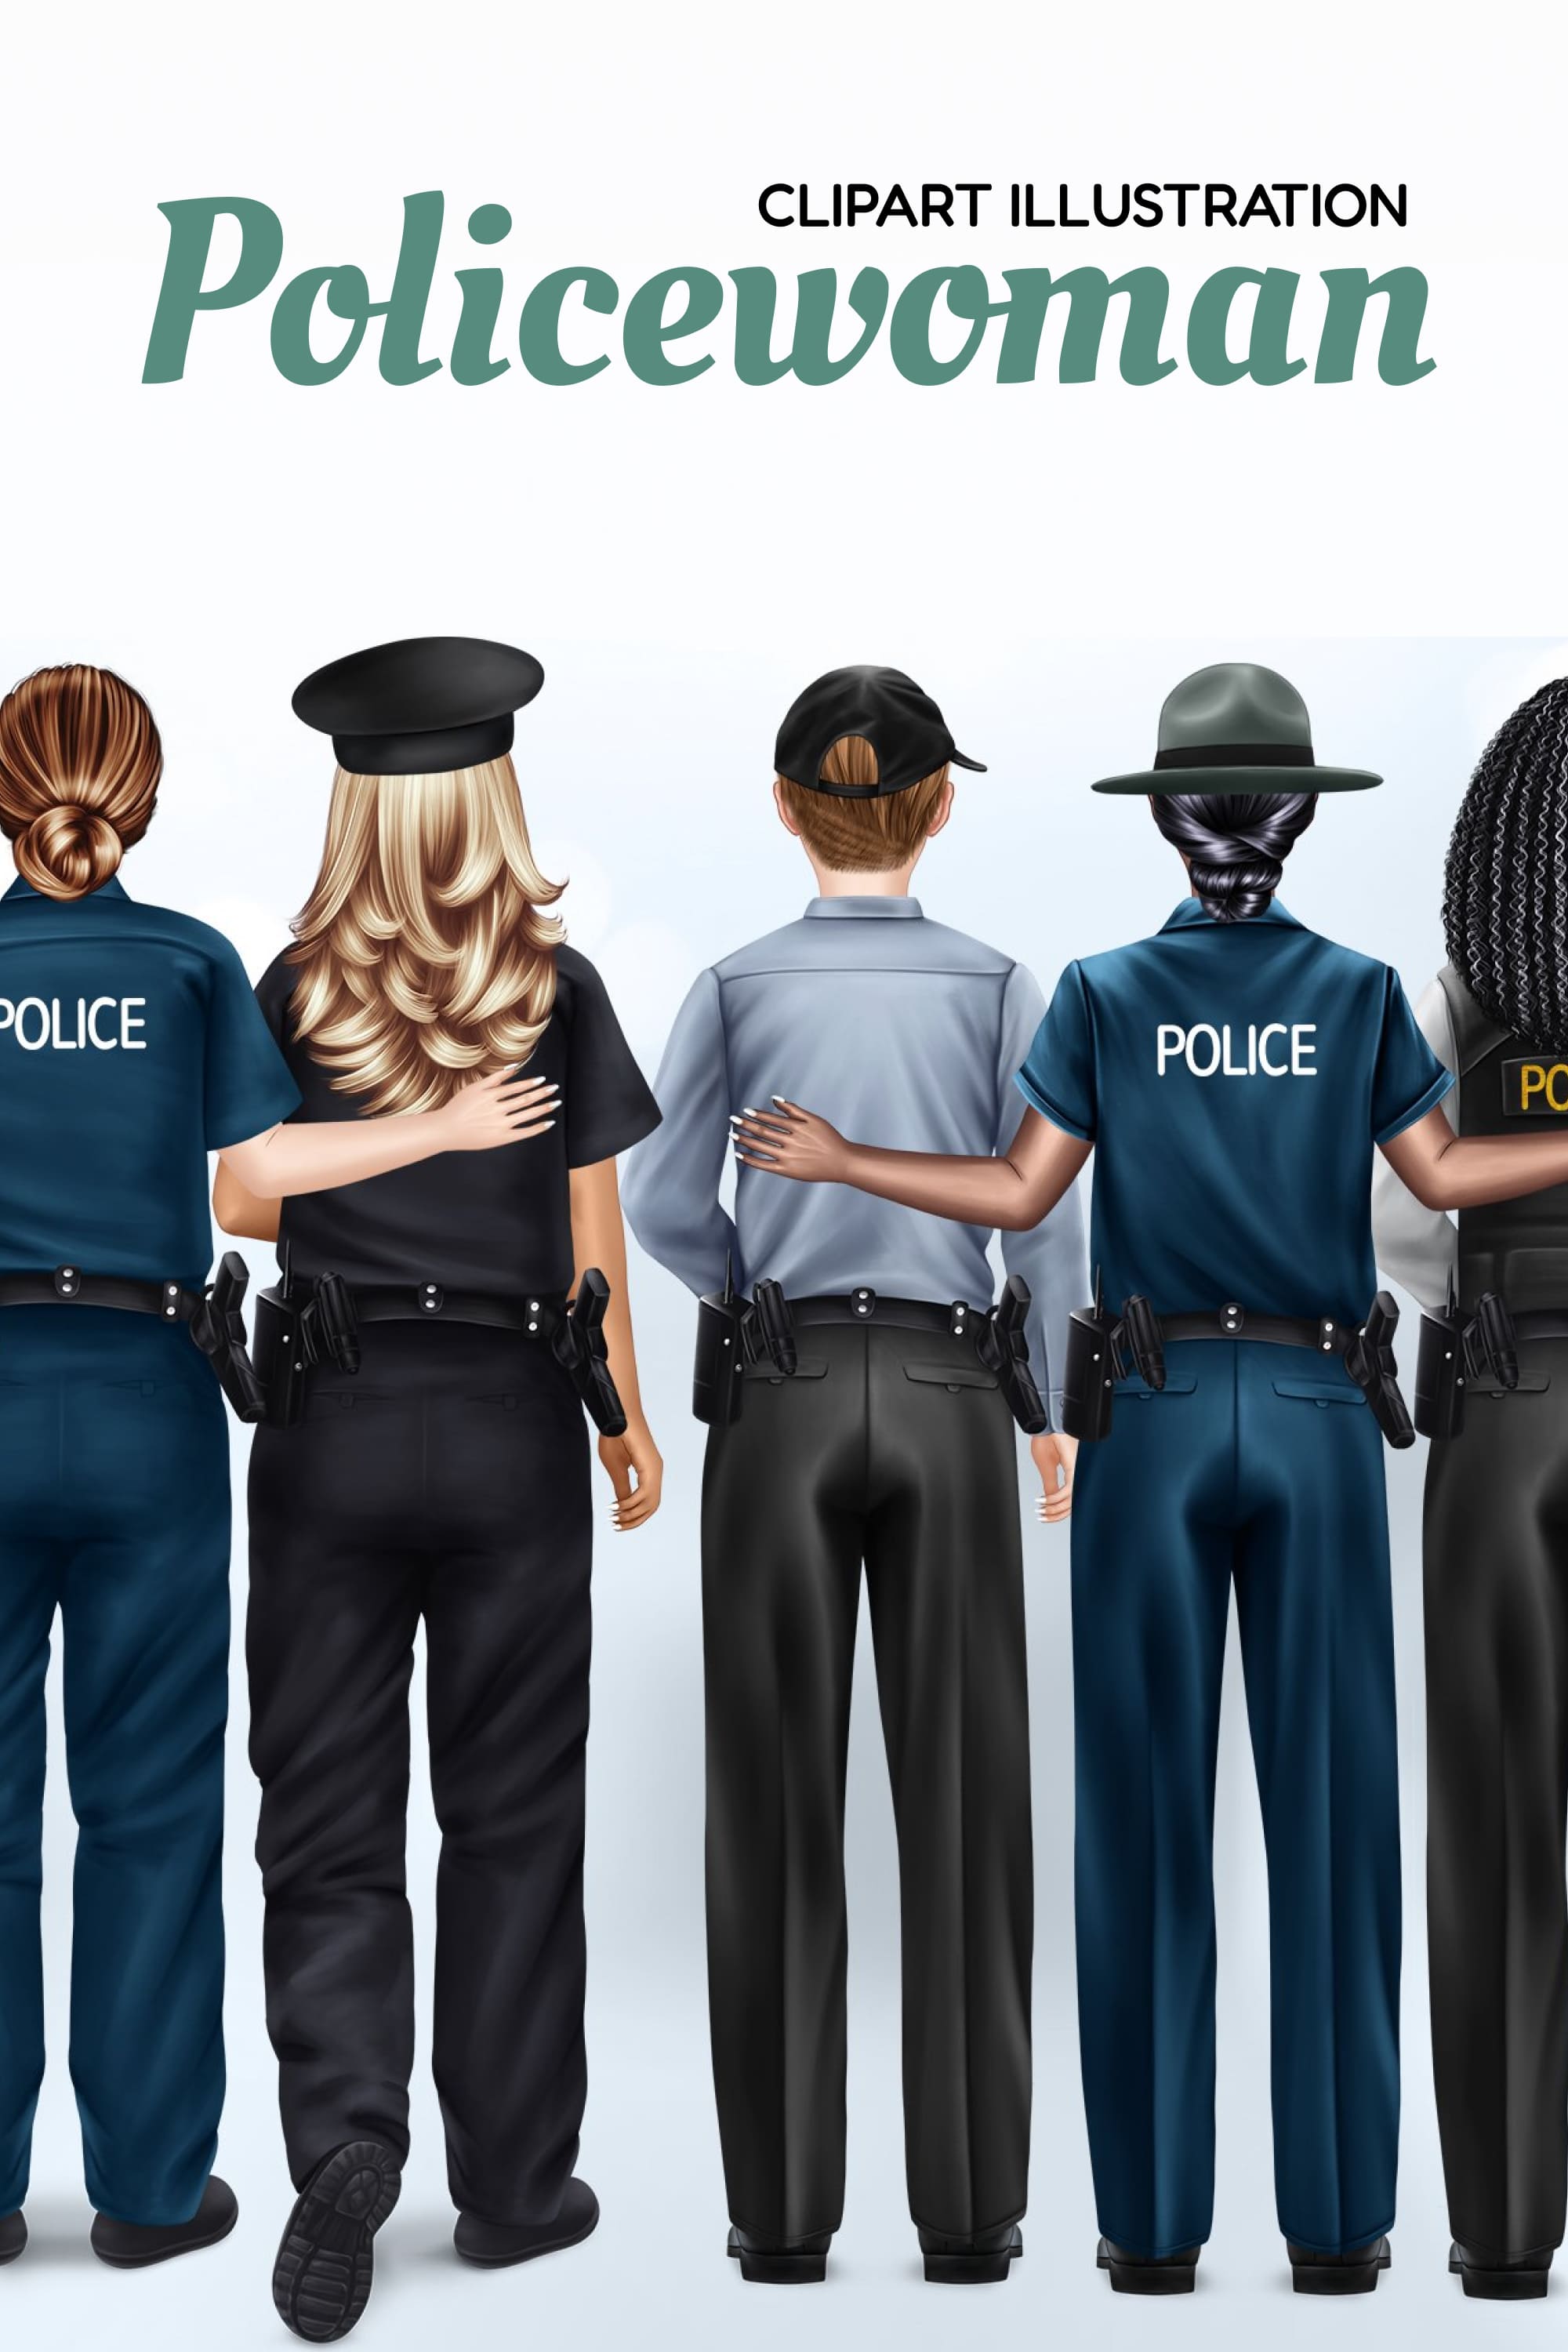 Policewoman Clip Art, Police Officers Clipart, Police PNG - Pinterest.